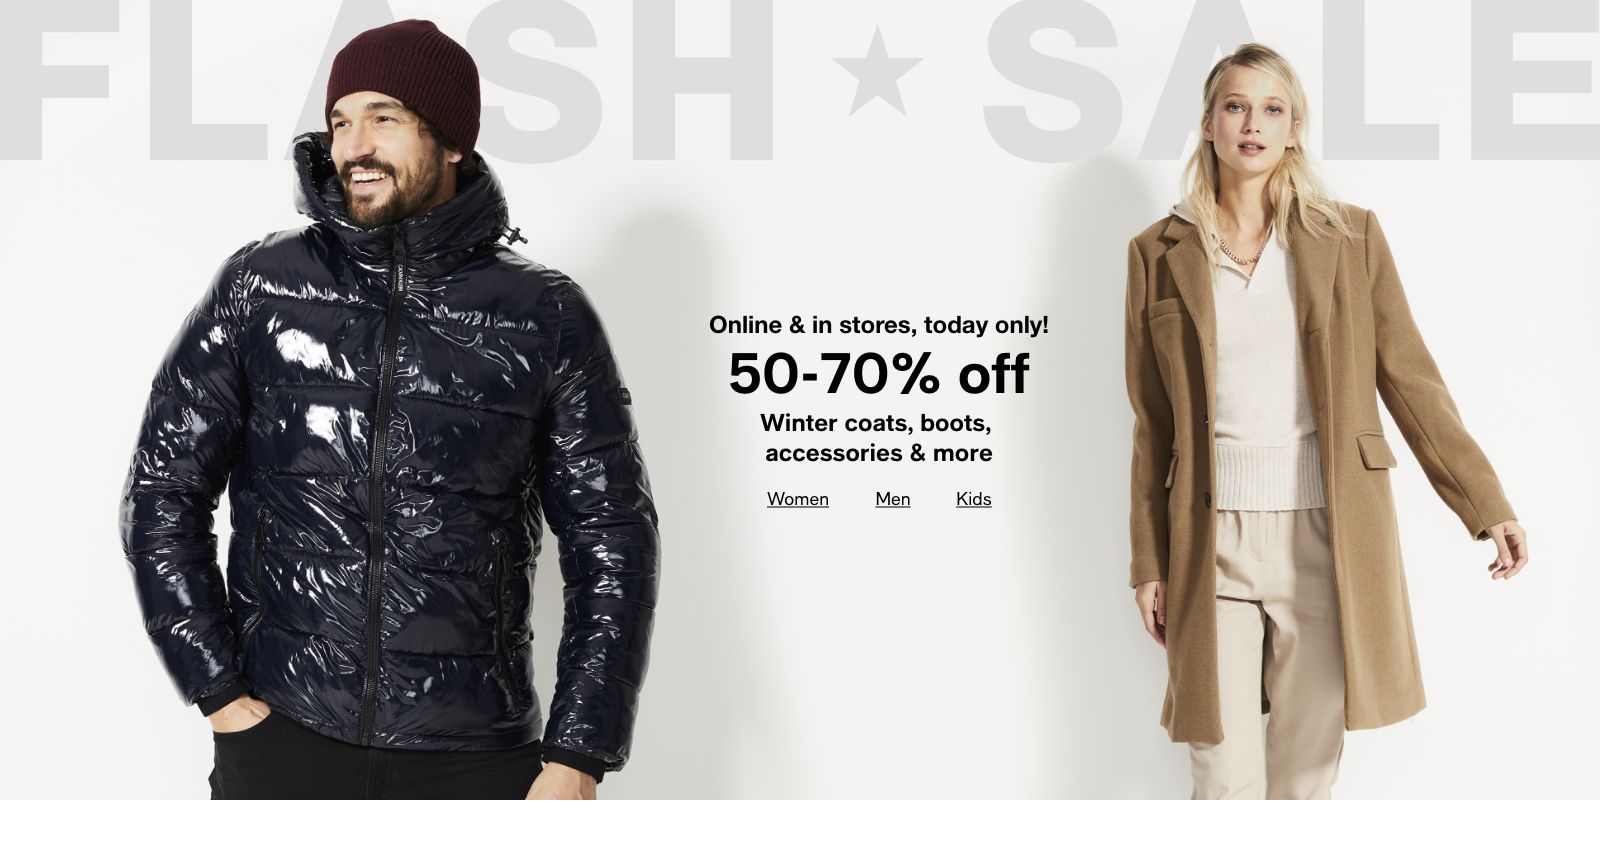 Flash Sale, Online and in stores, today only! 50-70% off, Winter coats, boots, accessories and more